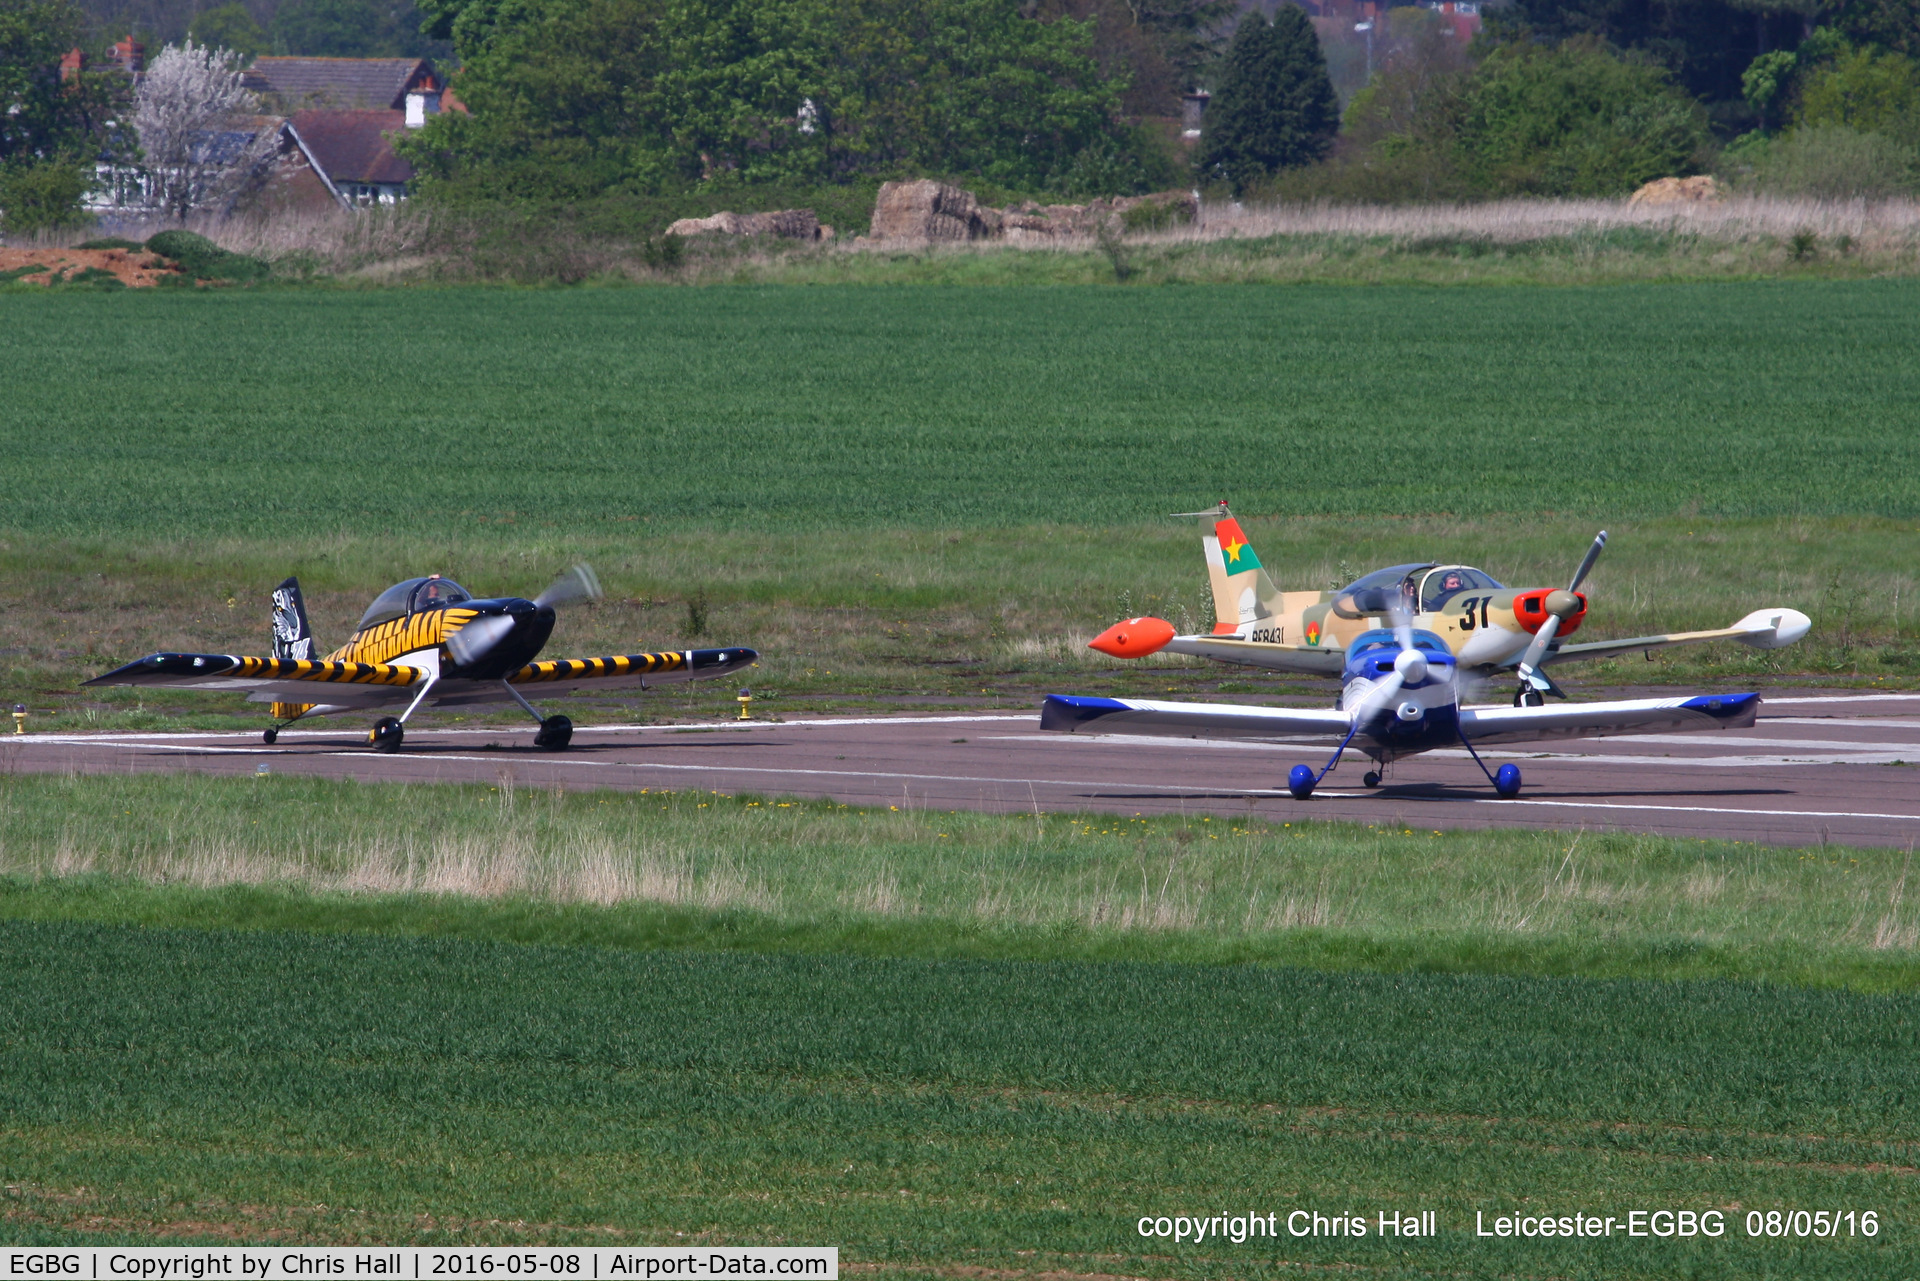 Leicester Airport, Leicester, England United Kingdom (EGBG) - waiting for the start of the Royal Aero Club air race at Leicester